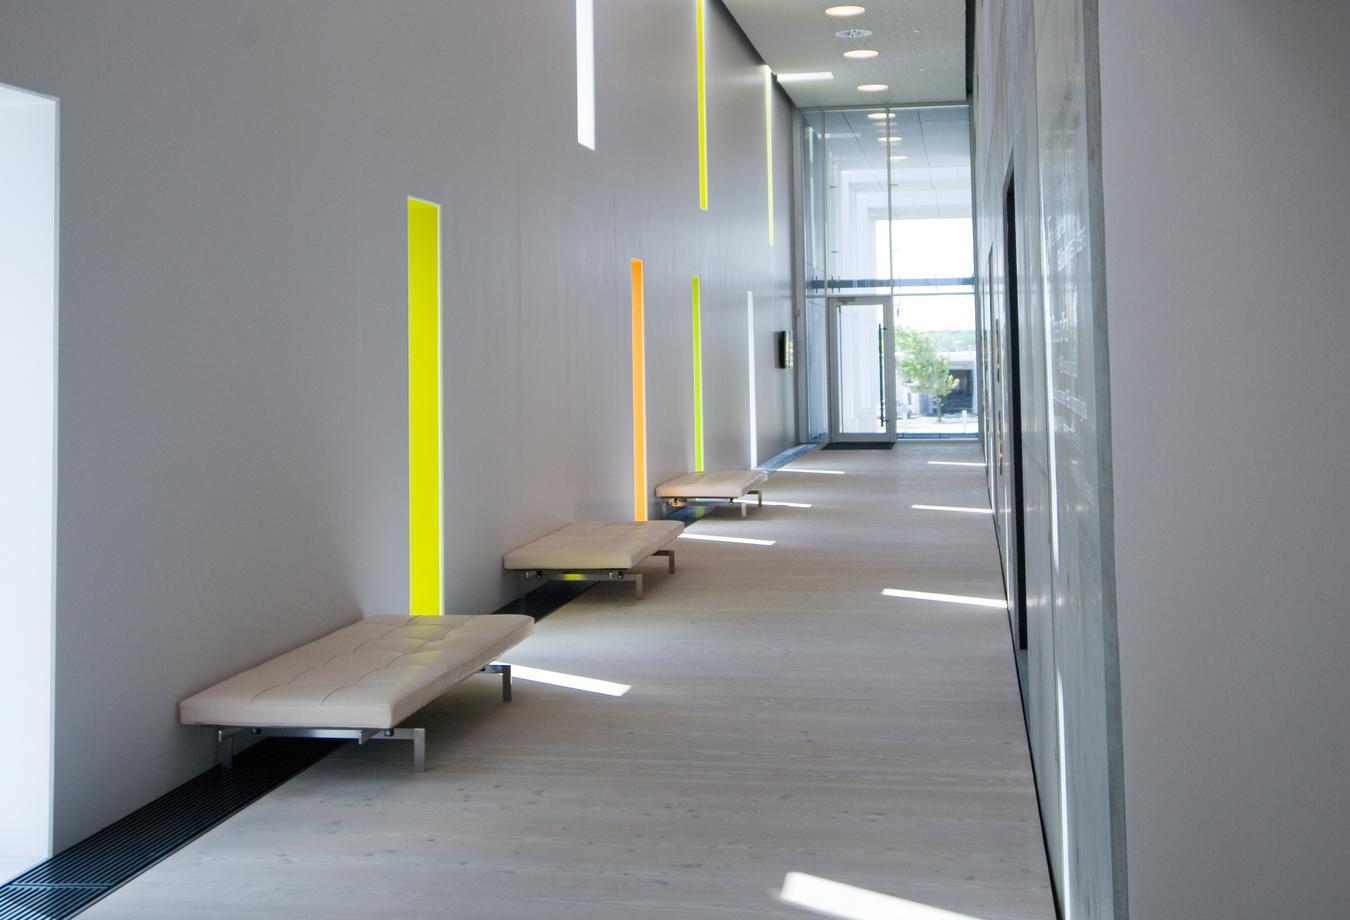 Hallway with narrow light inlets that form a pattern. Photo